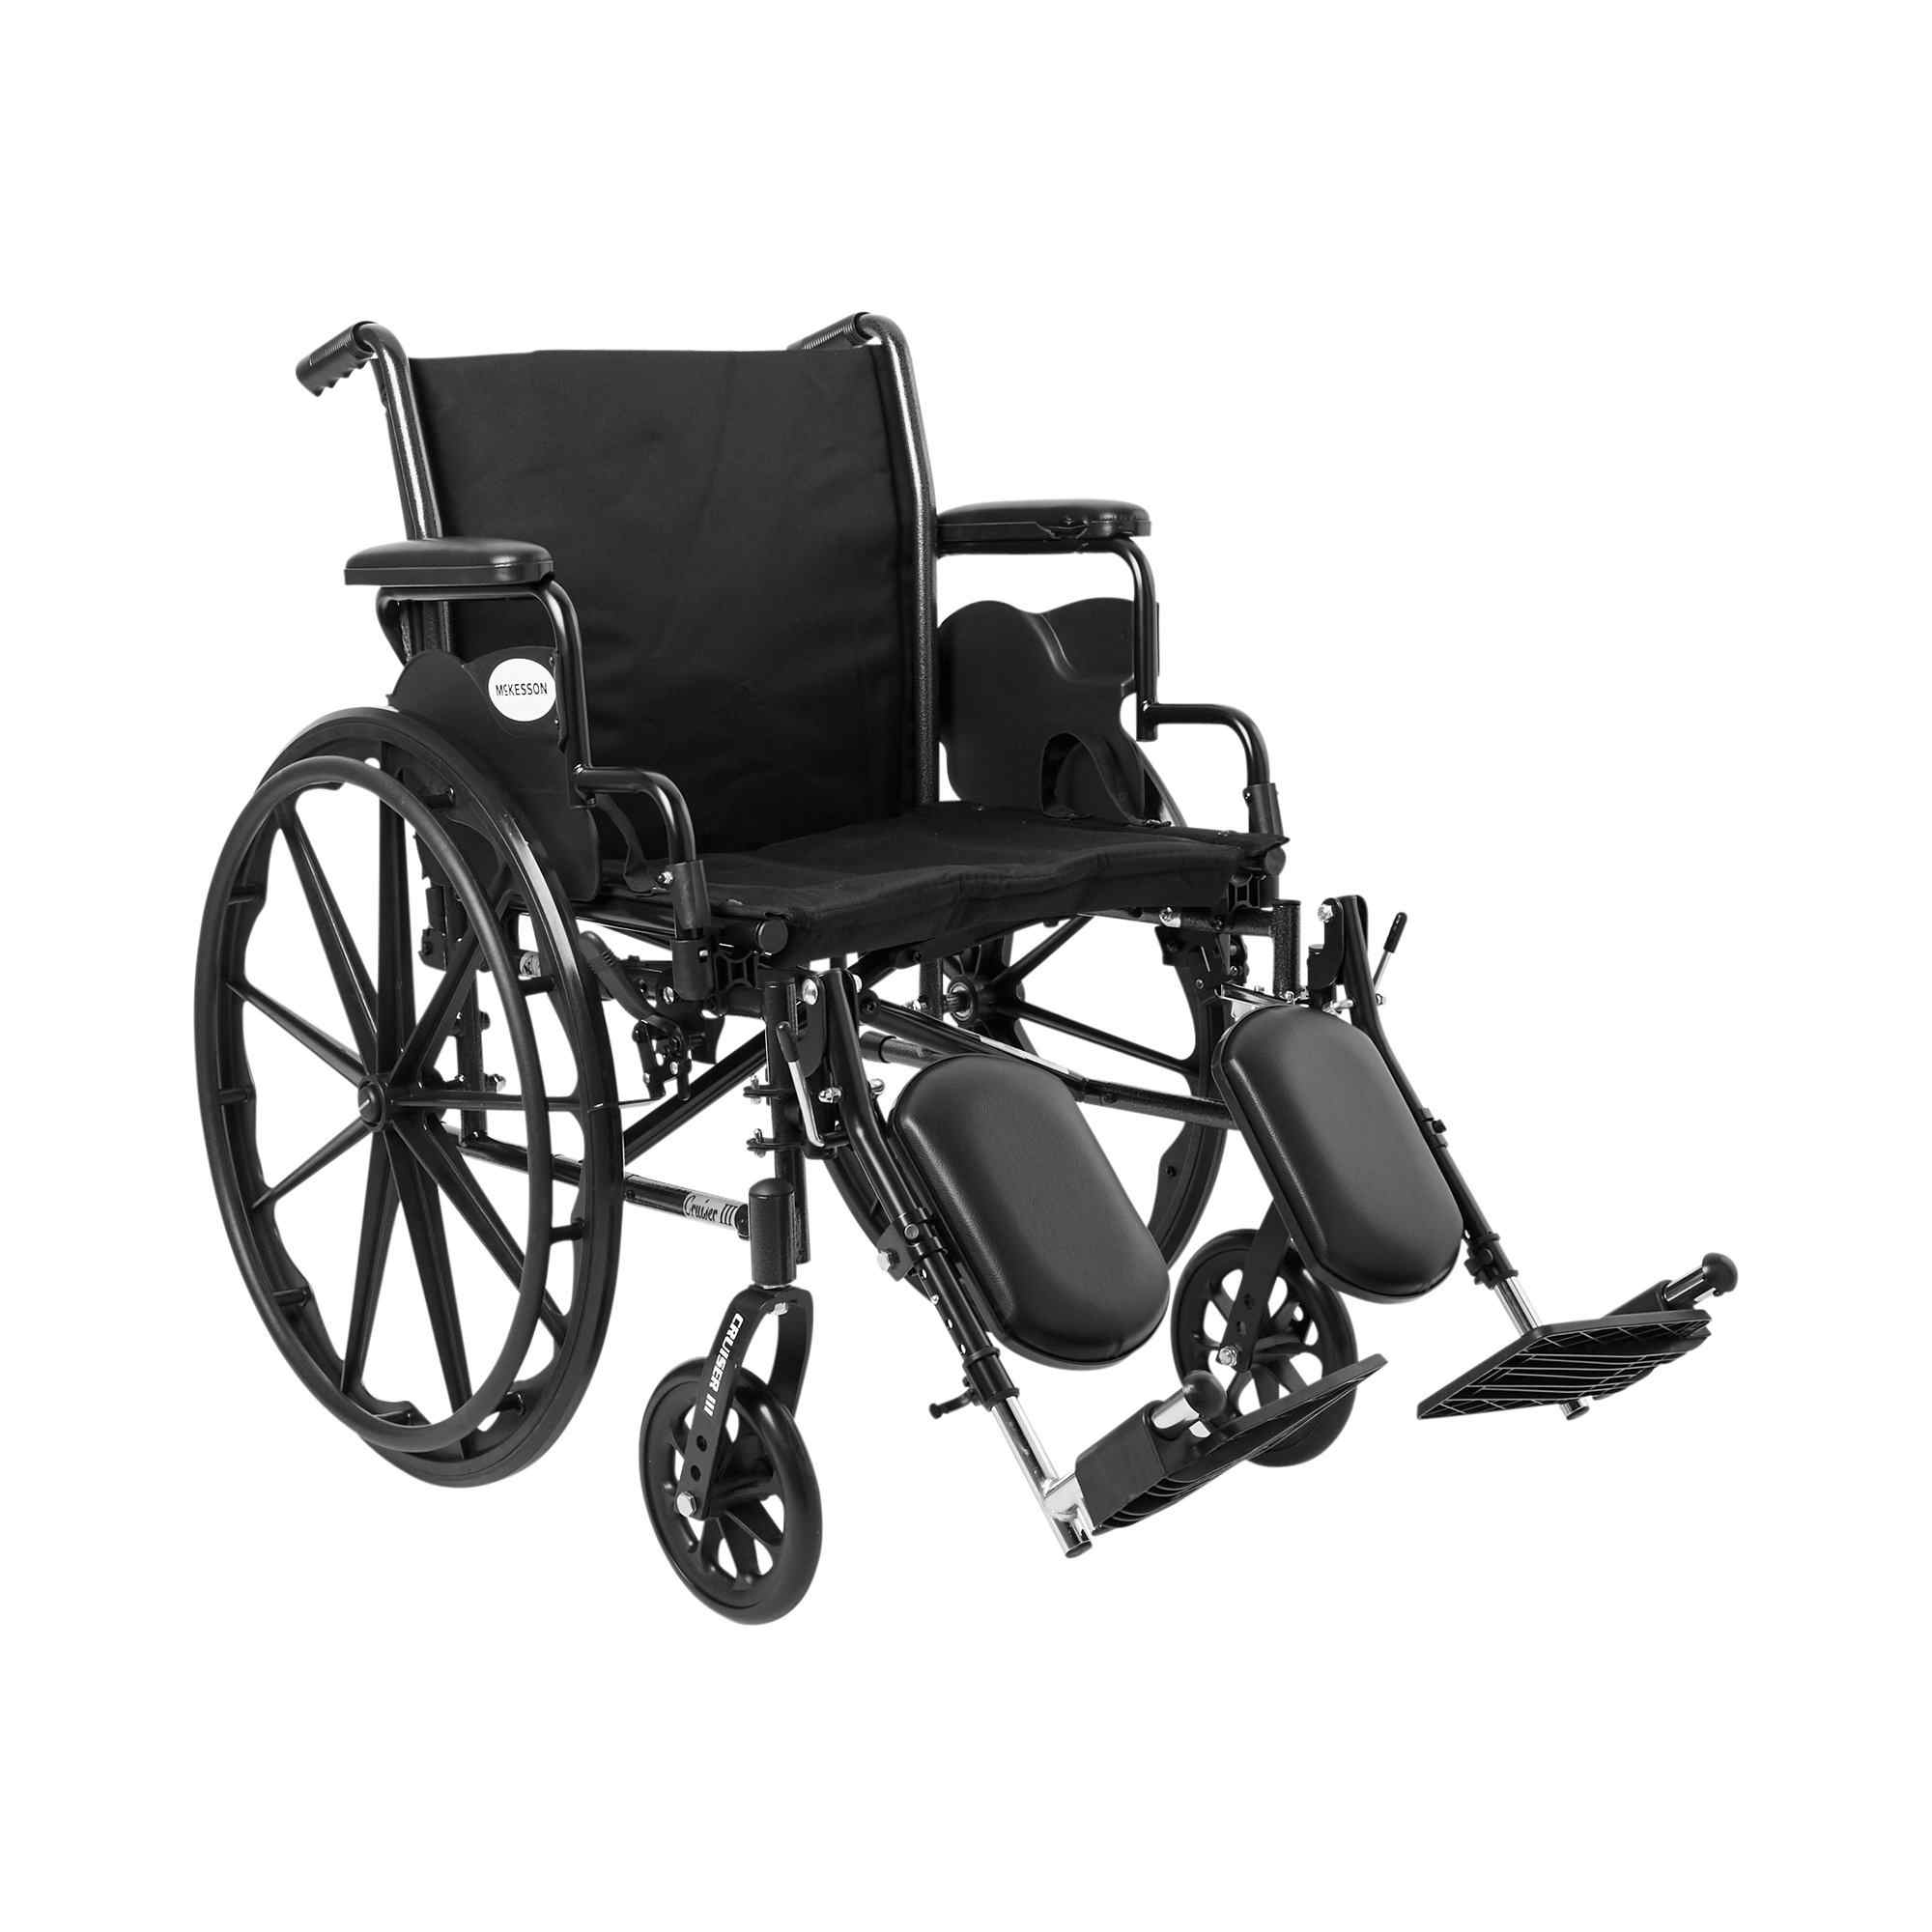 McKesson Lightweight Wheelchair with Removable Padded Arms, Swing-Away Elevating Legrest, 146-K320DDA-ELR, 20" Seat - 1 Each